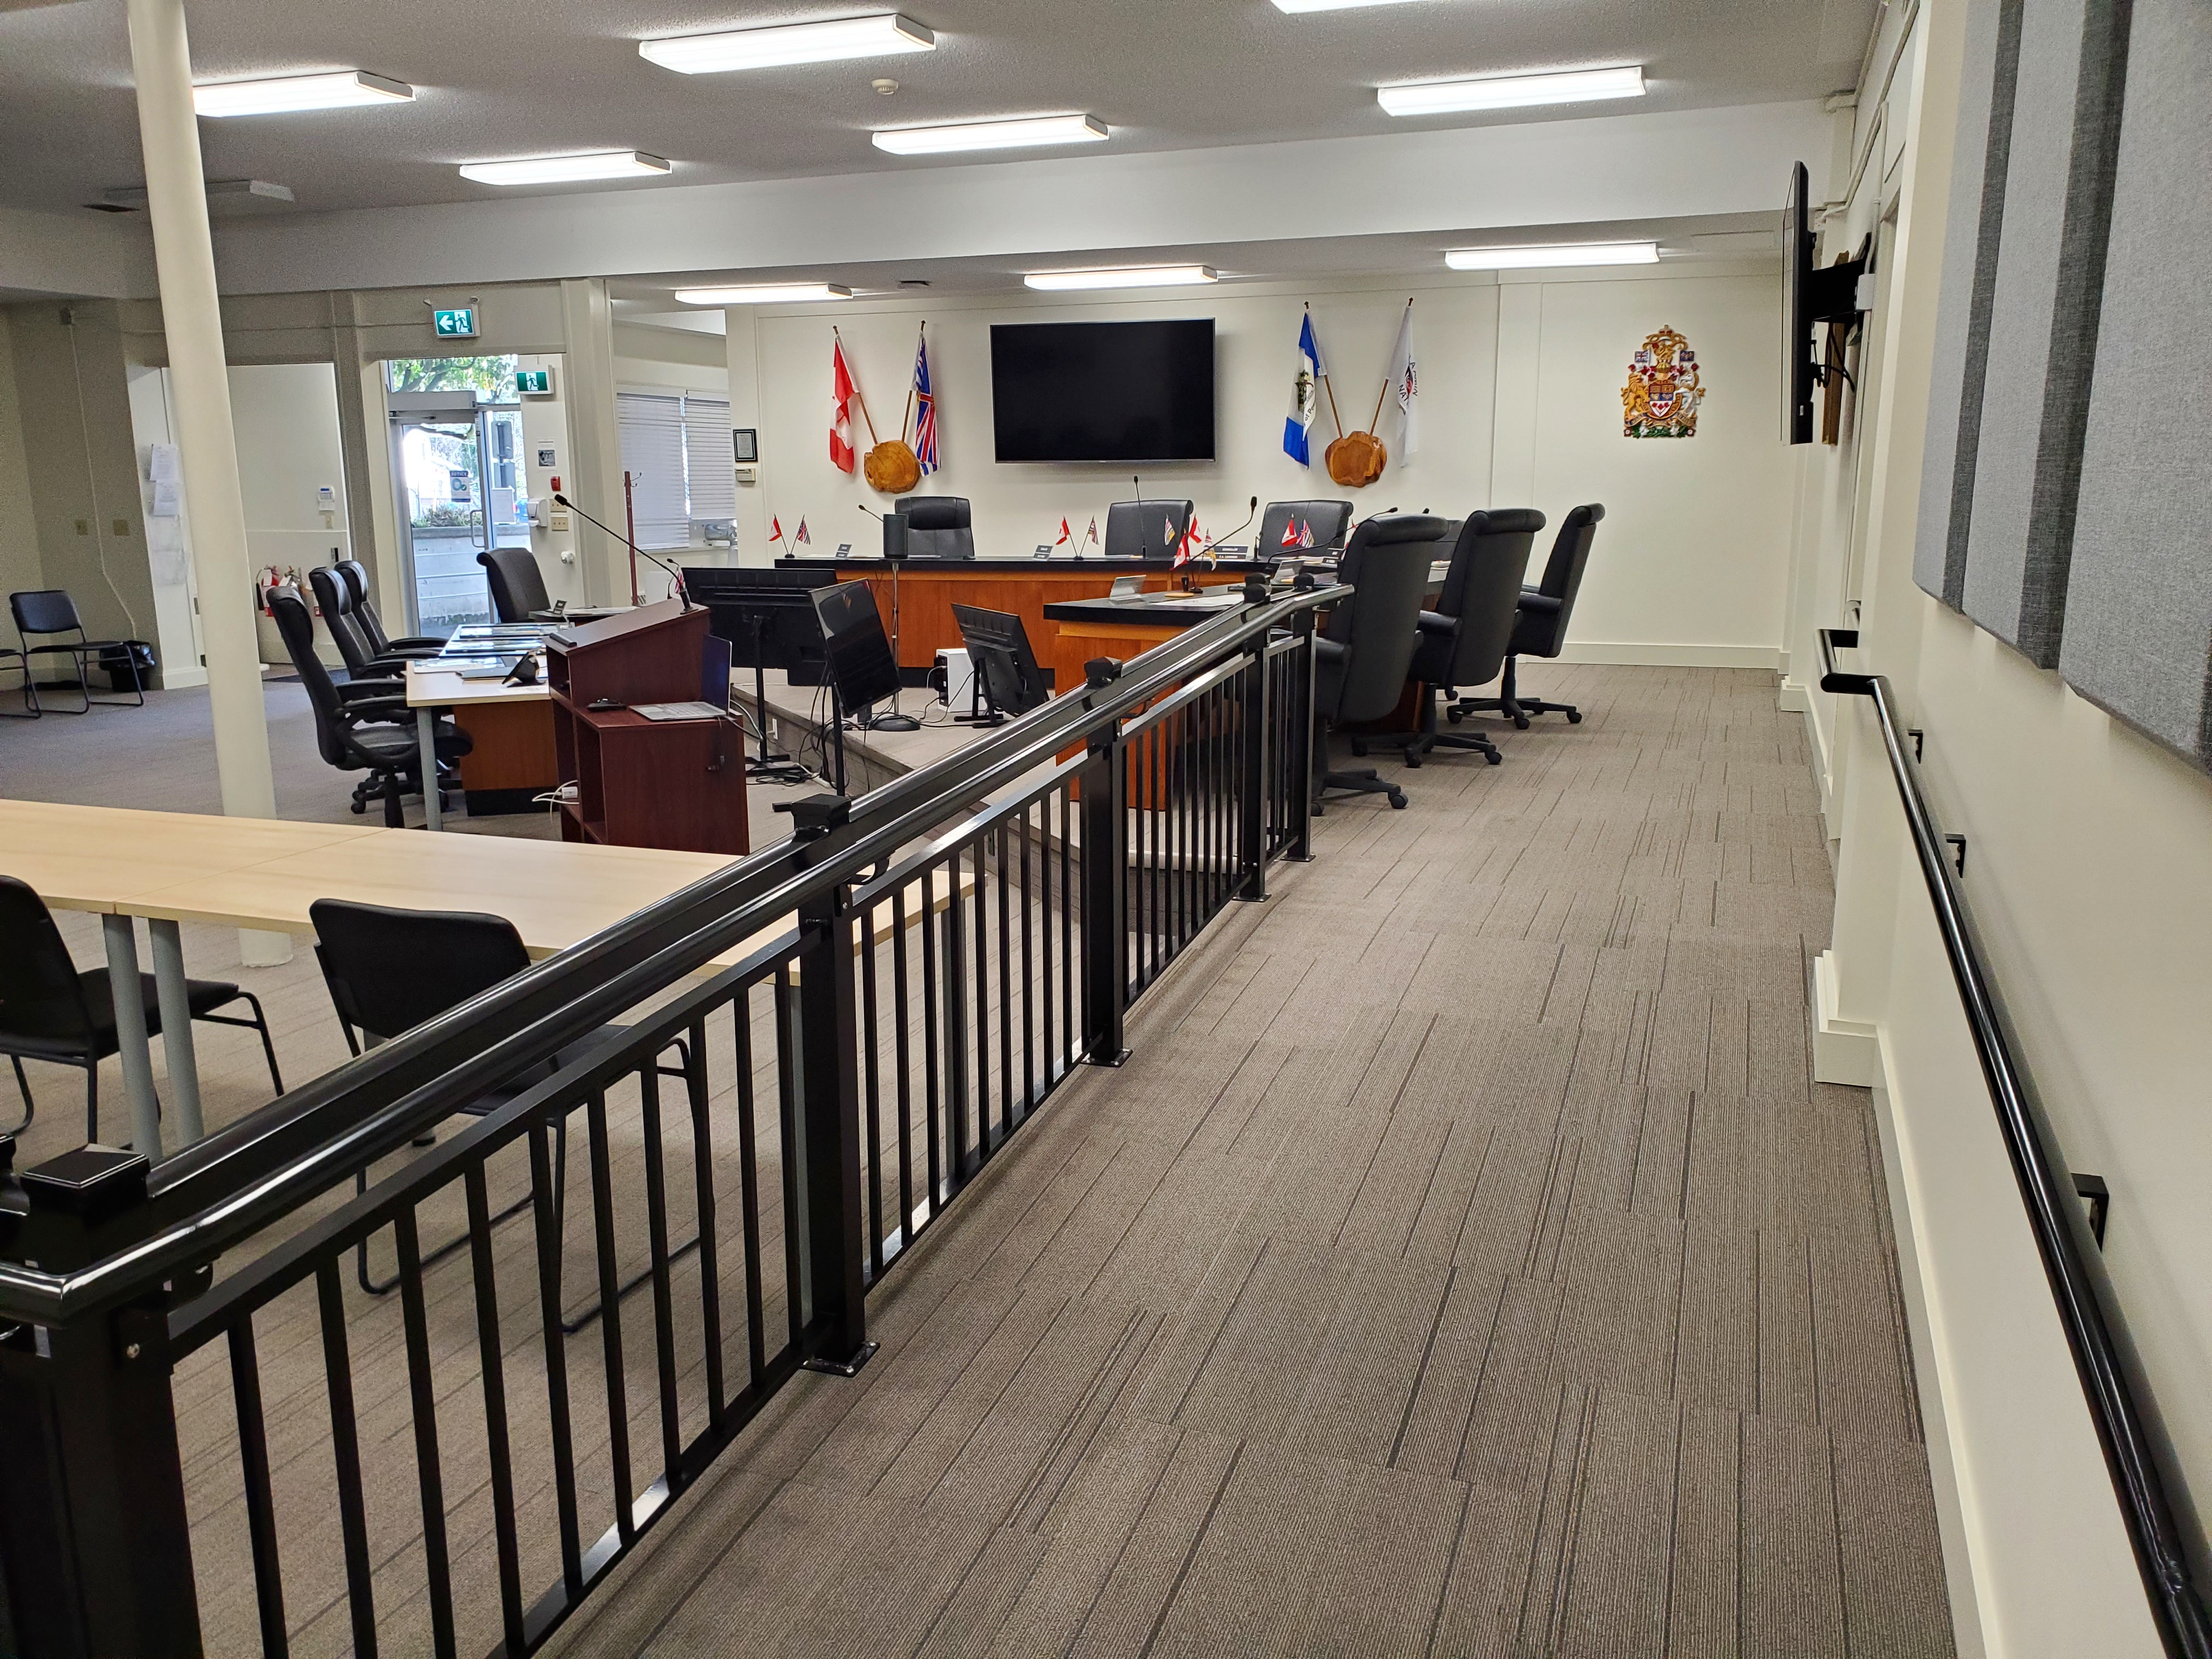 A ramp is in the foreground that leads to the Power River City Council desks in the Council Chambers. Black railings and carpeted floors. The accessible entrance is in the background.